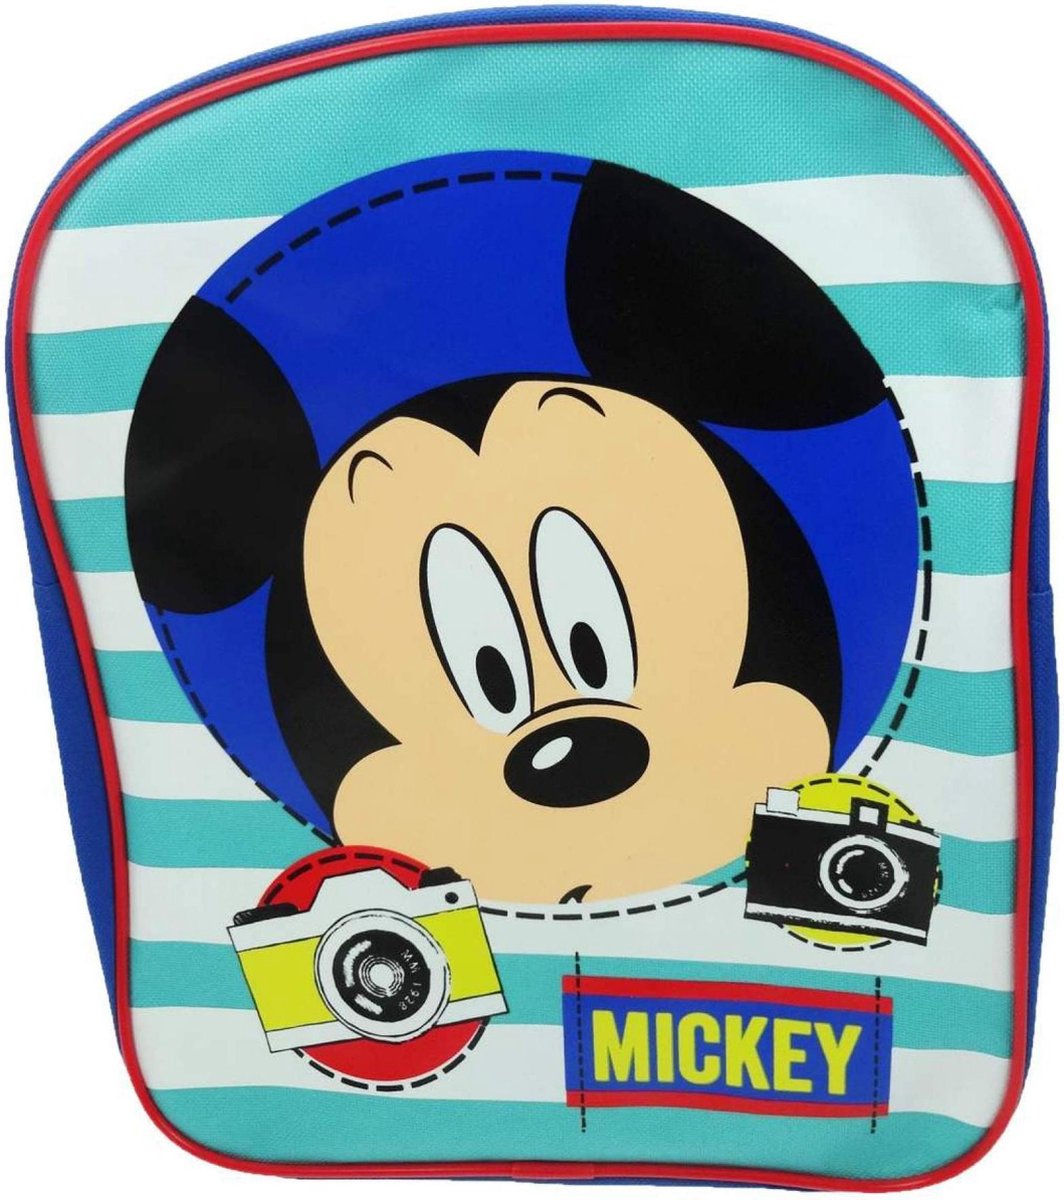 Mickey Mouse rugzak - Mickey rugtas 30 x 24 centimeter